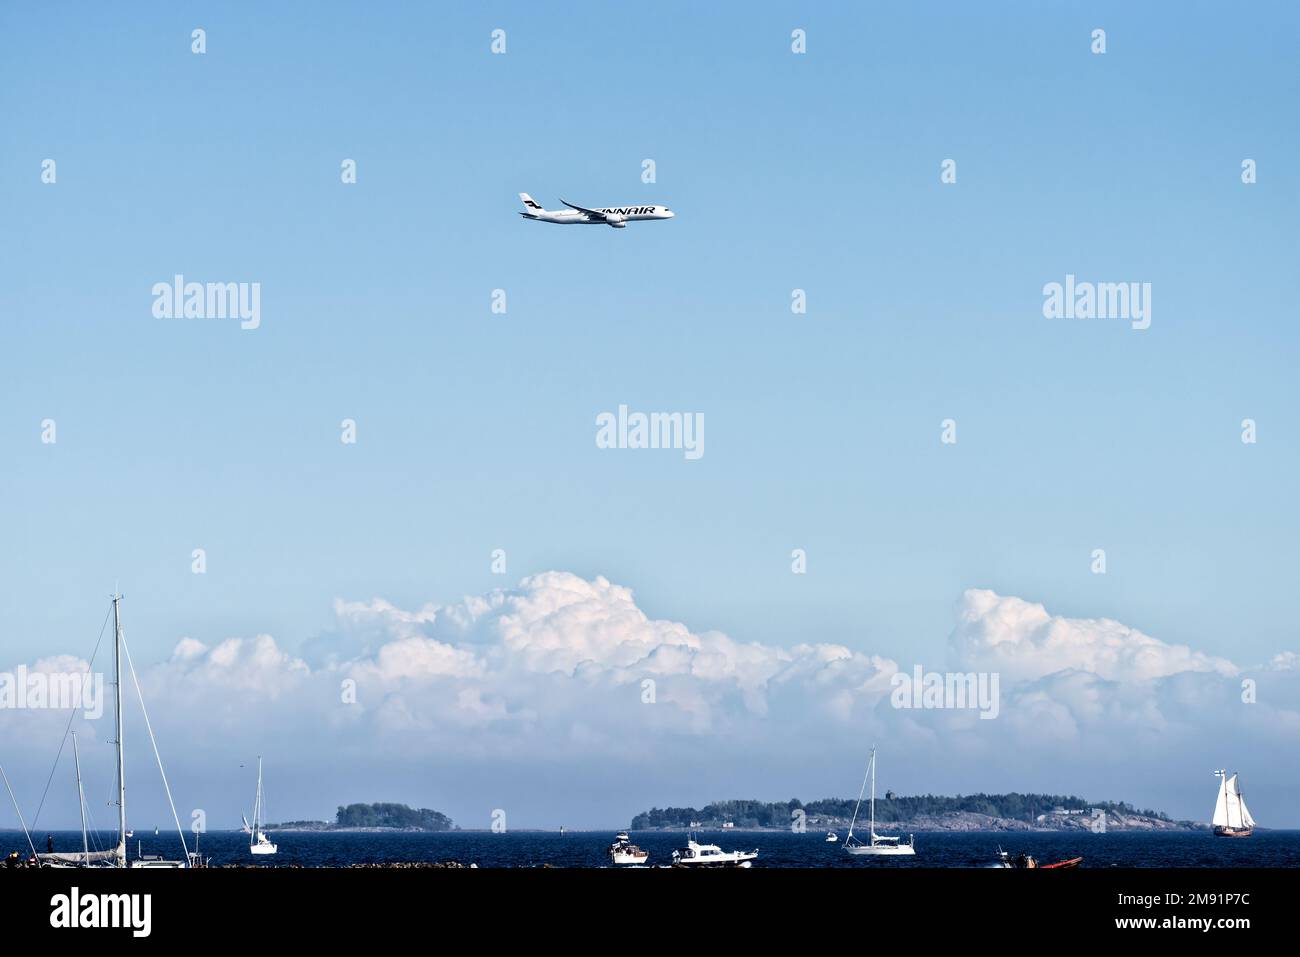 Helsinki, Finland - 9 June 2017: Finnair Airbus A350 XWB airliner flying in extremely low altitude over the Helsinki archipelago with boats on the for Stock Photo